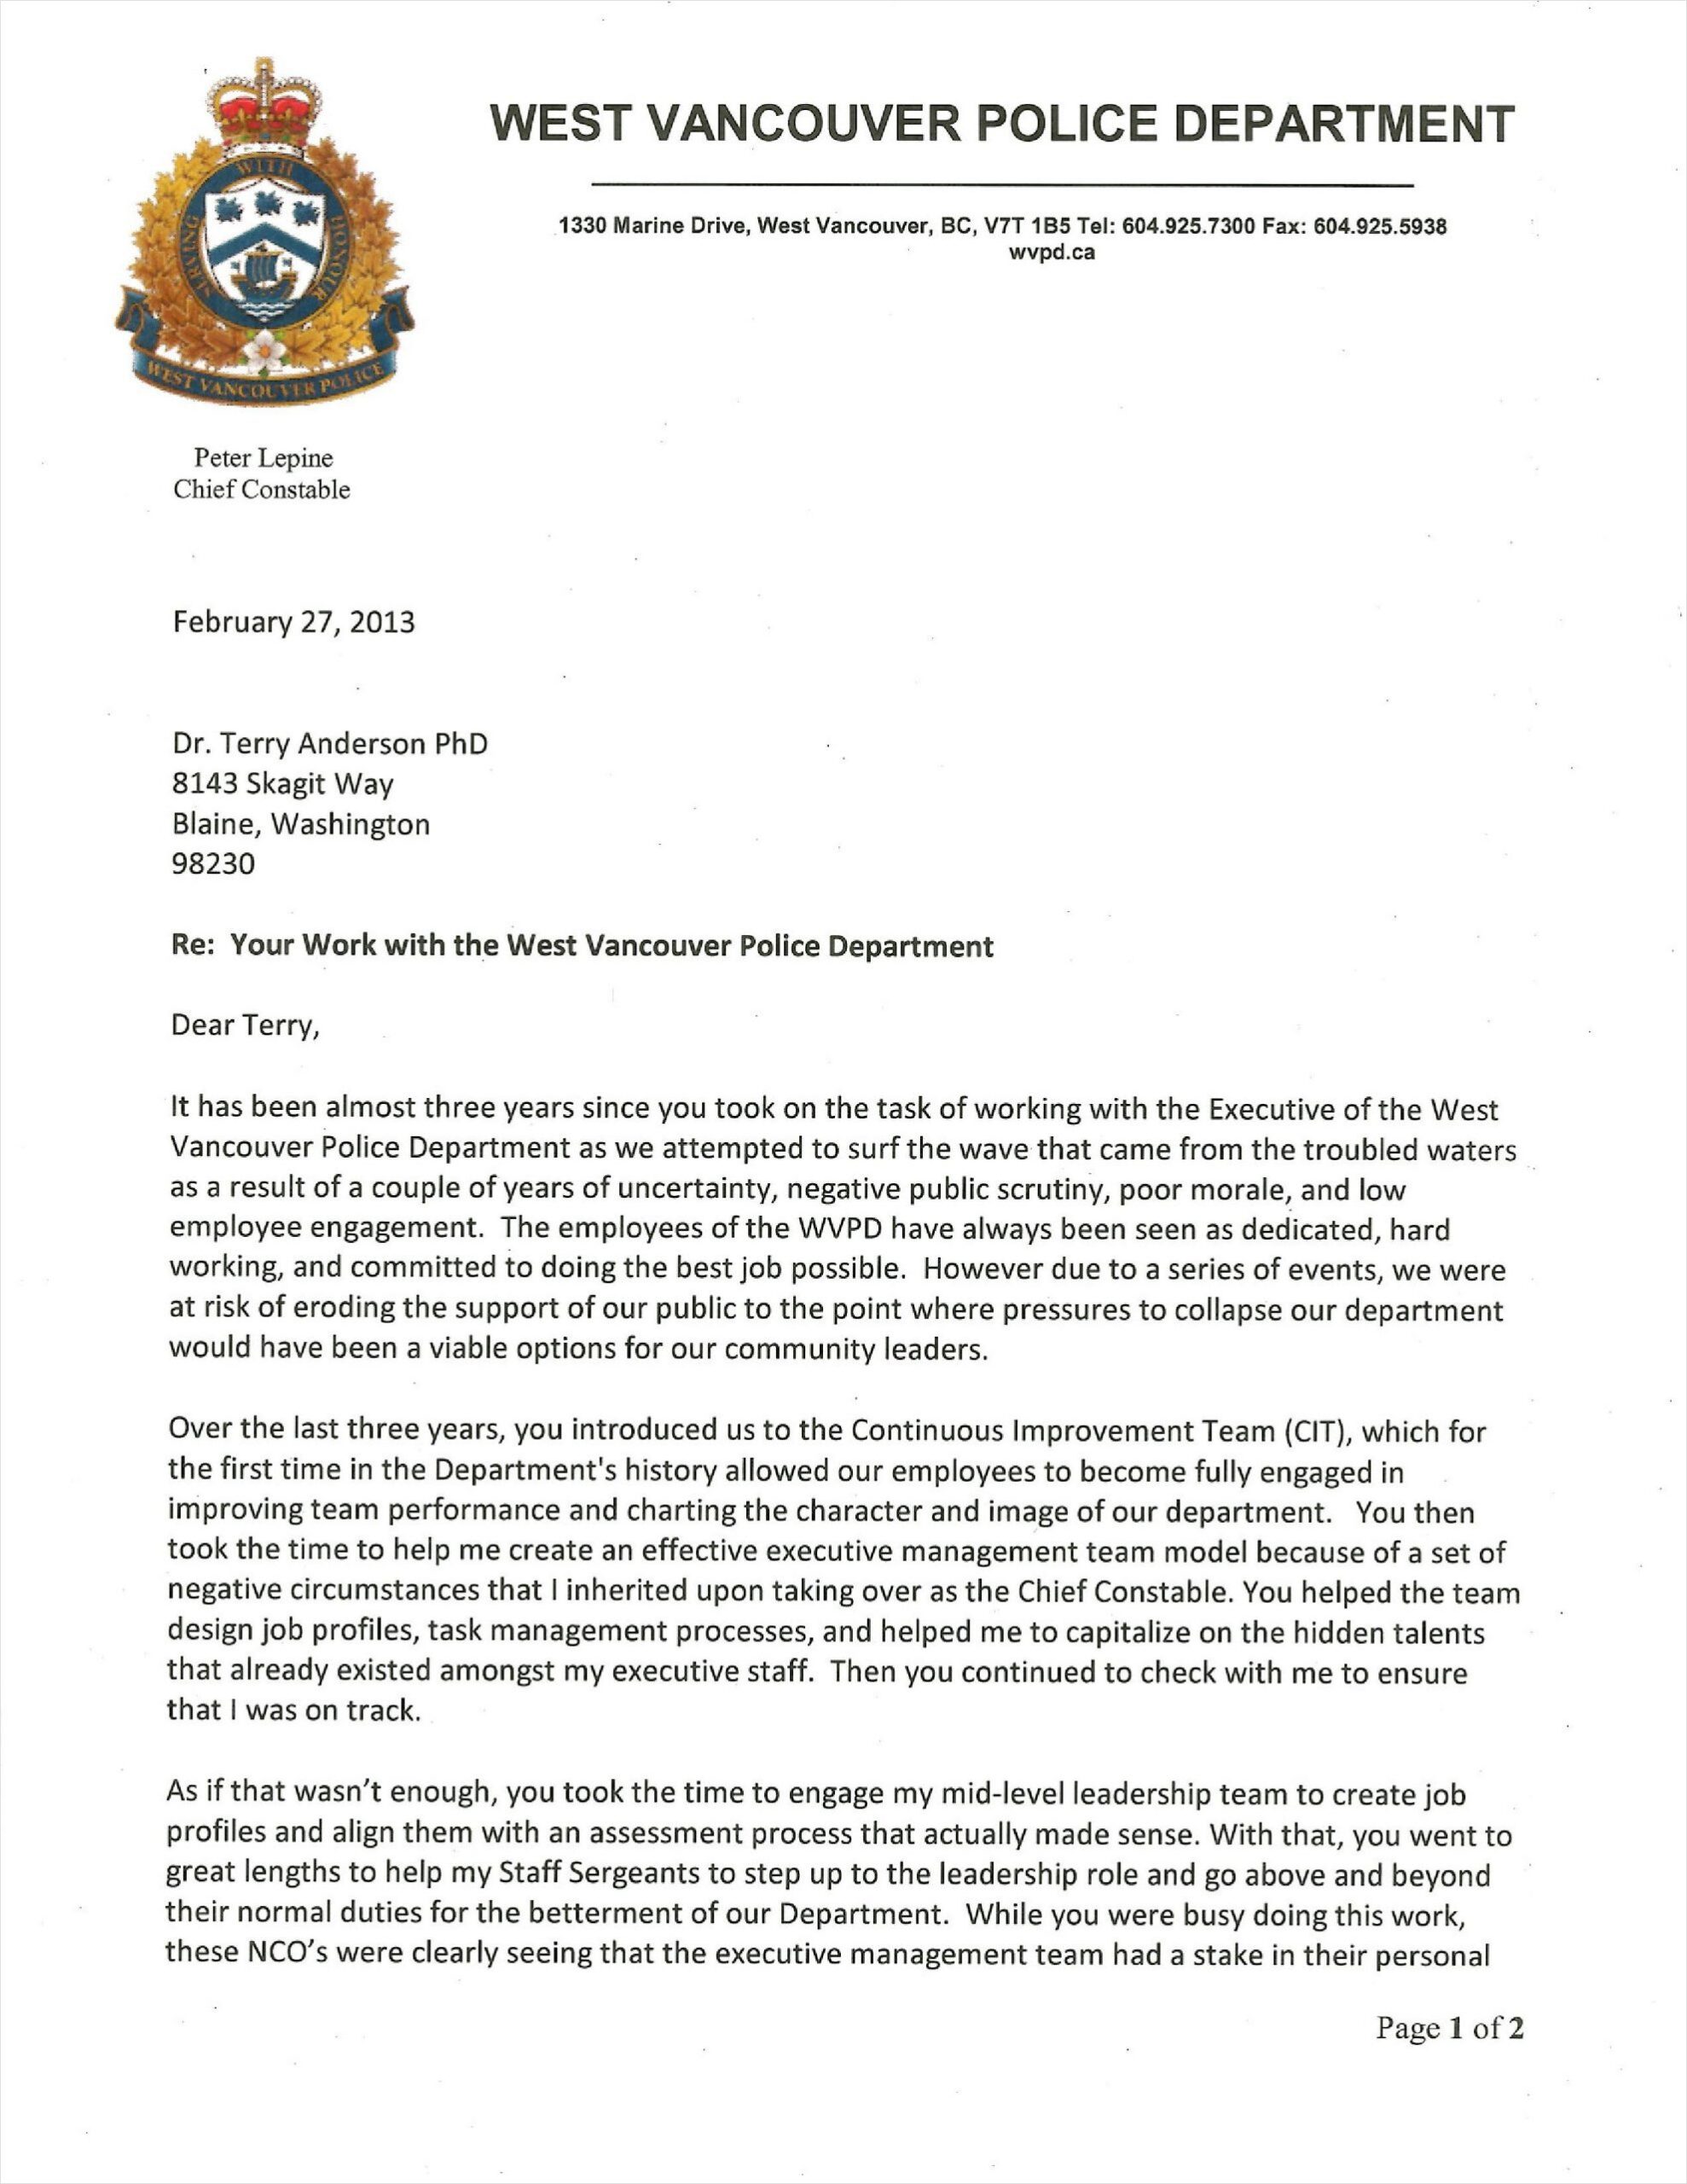 example of police officer recommendation letter template